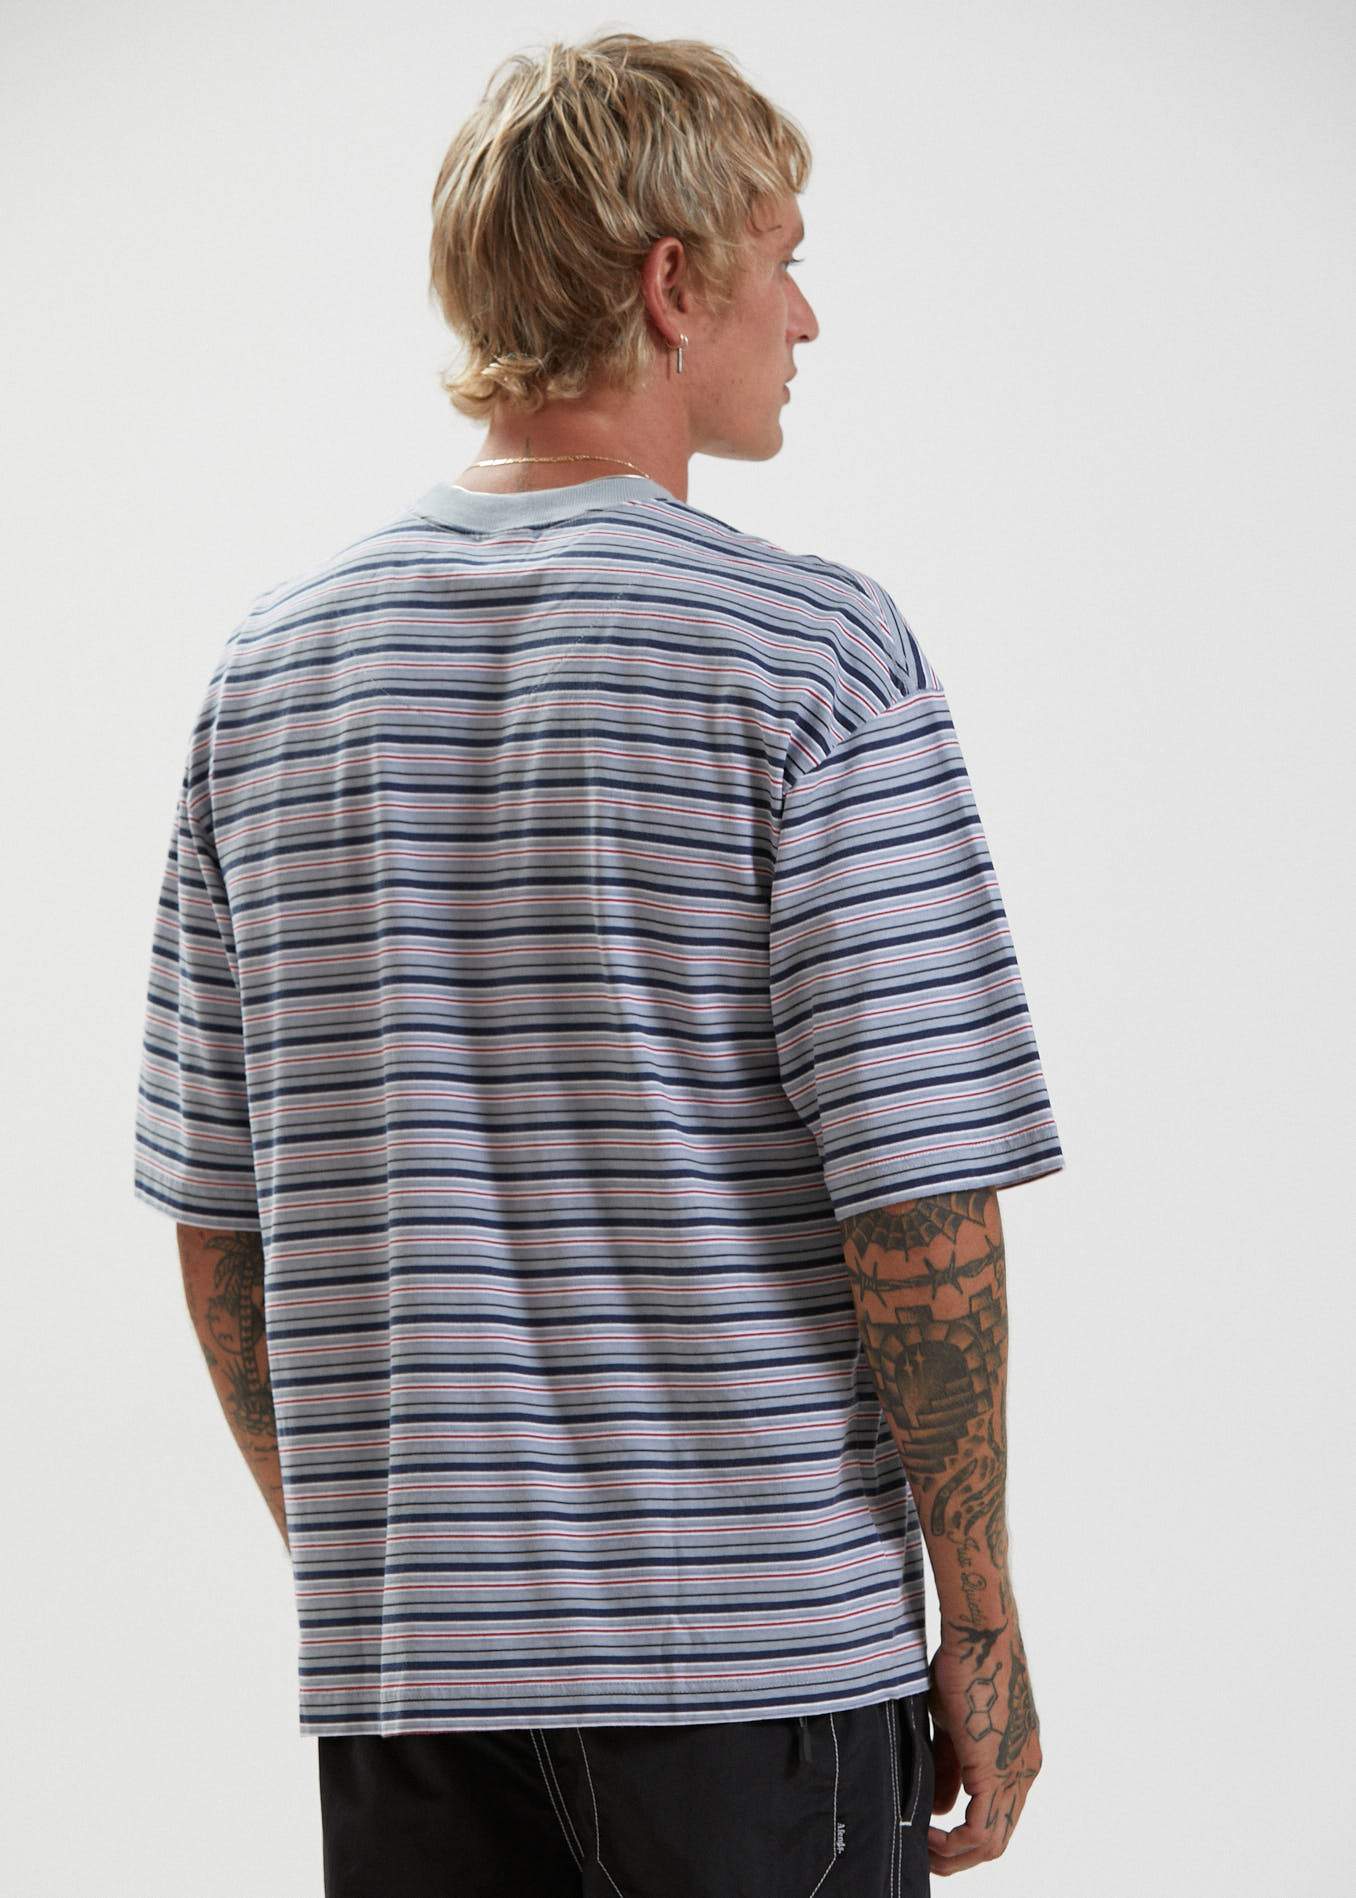 Afends Surplus  - Reycled Stripe Oversized T-Shirt - Shadow Shadow